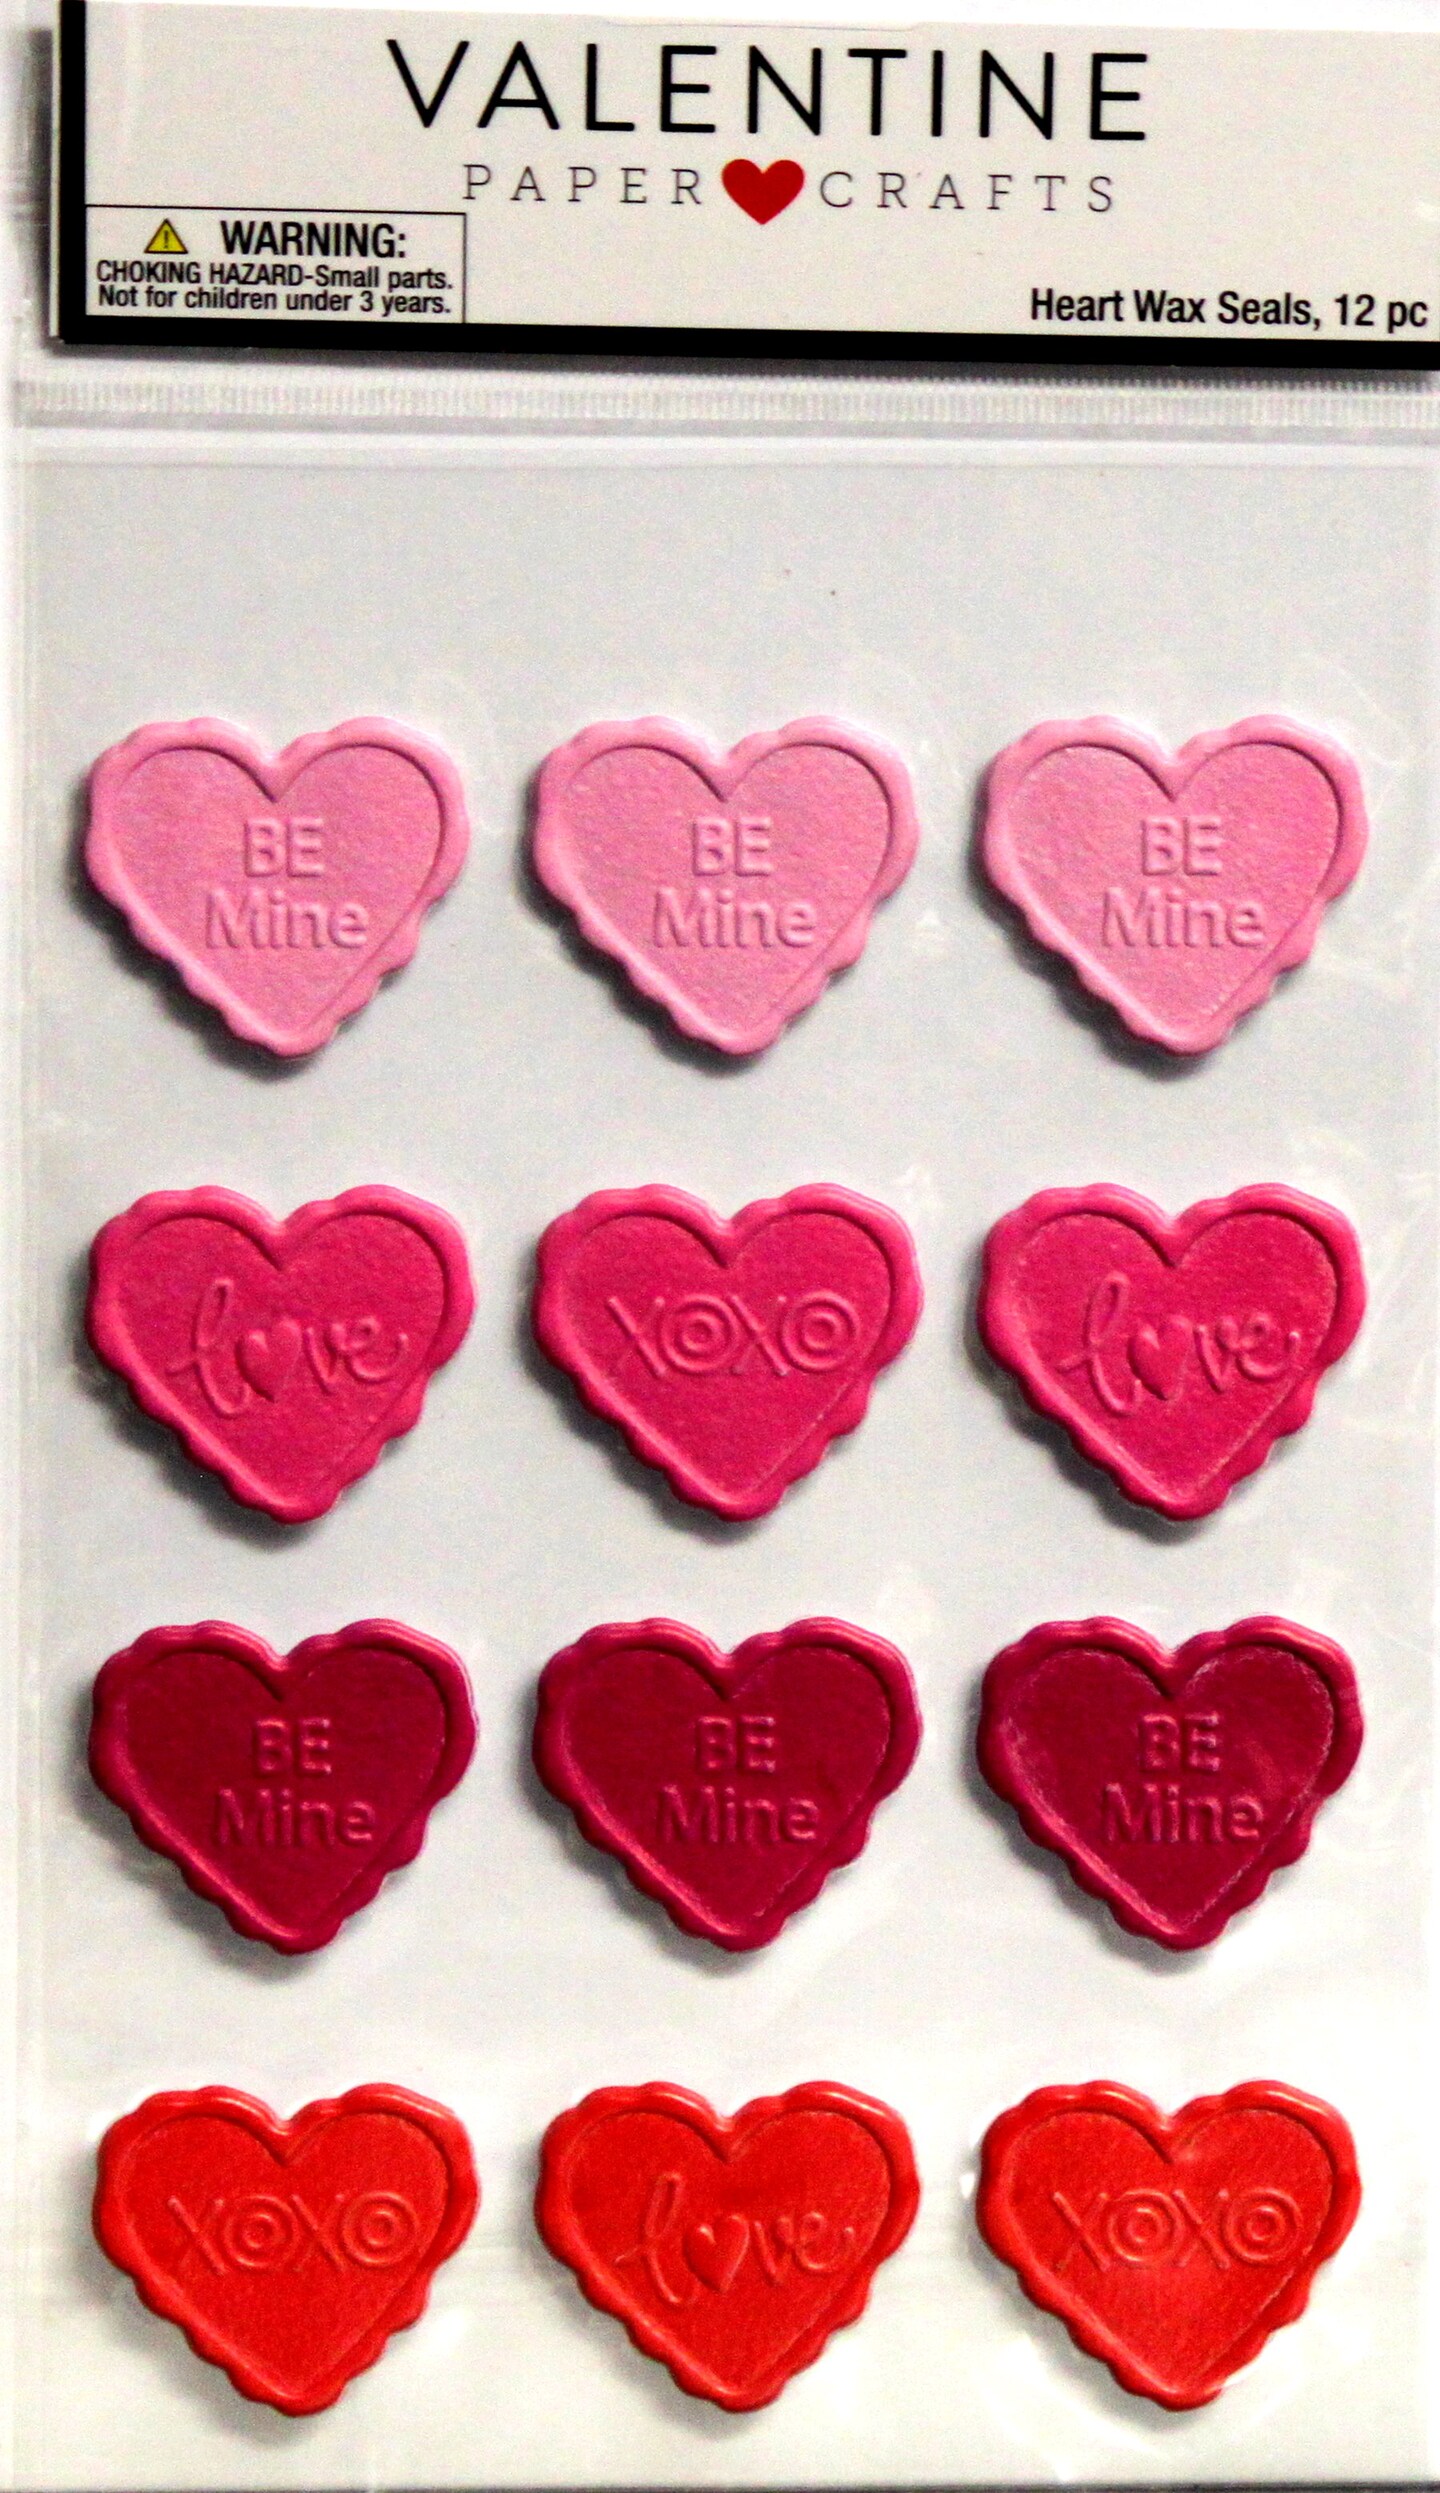 Paper Crafts Valentine Heart Wax Seals Dimensional Embossed Stickers